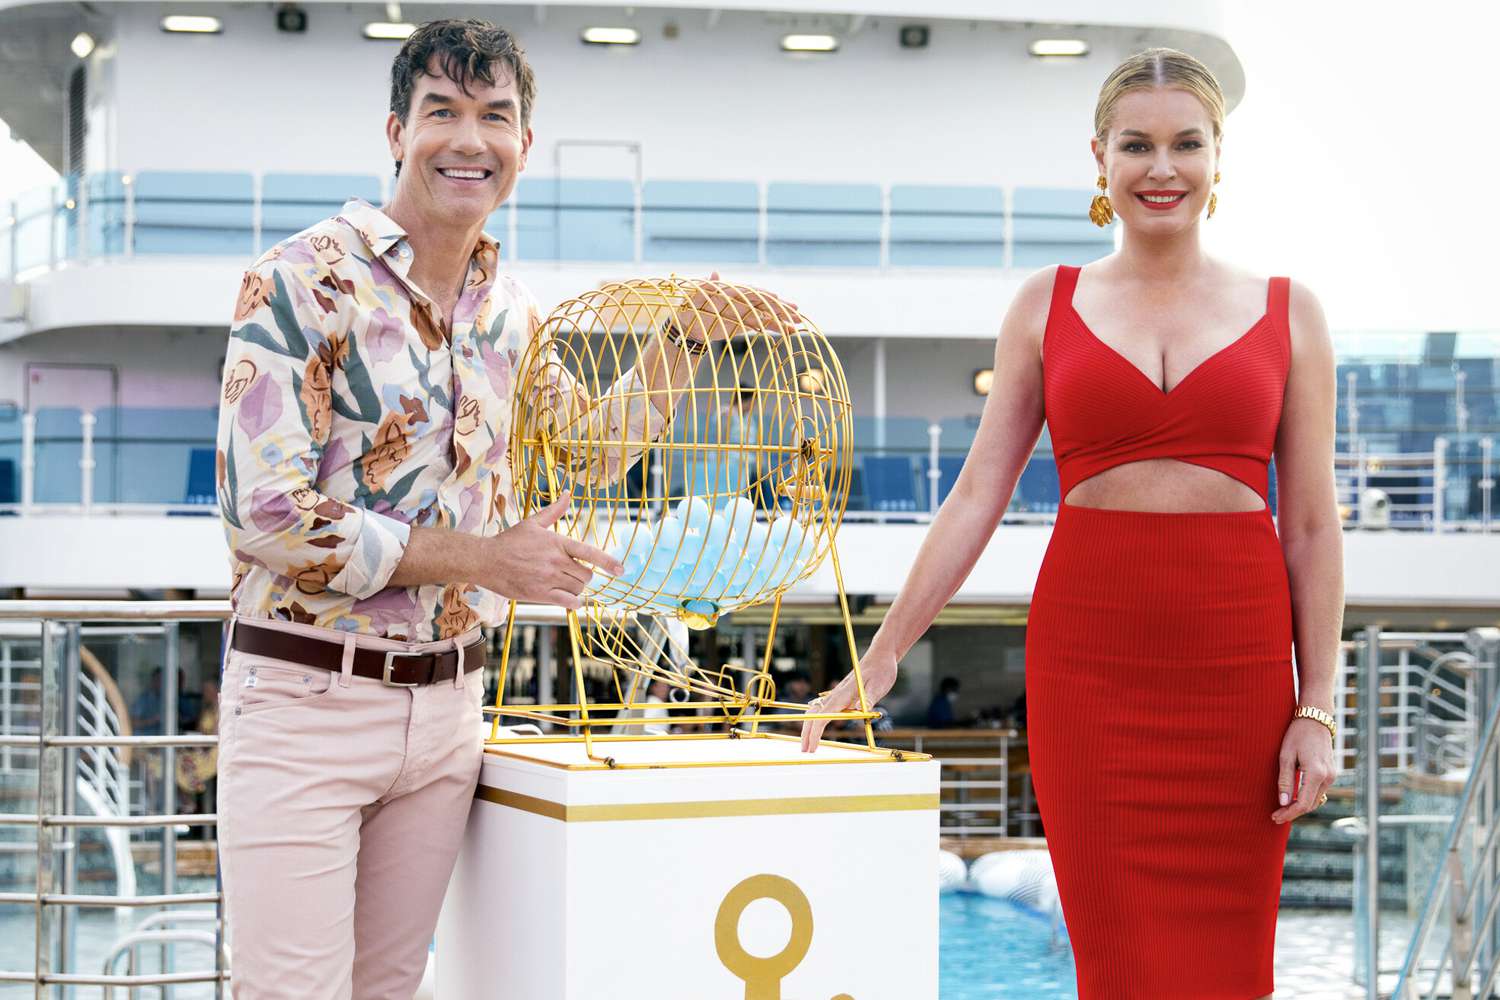 The Real Love Boat reveals cast and crew for the new reality series | EW.com